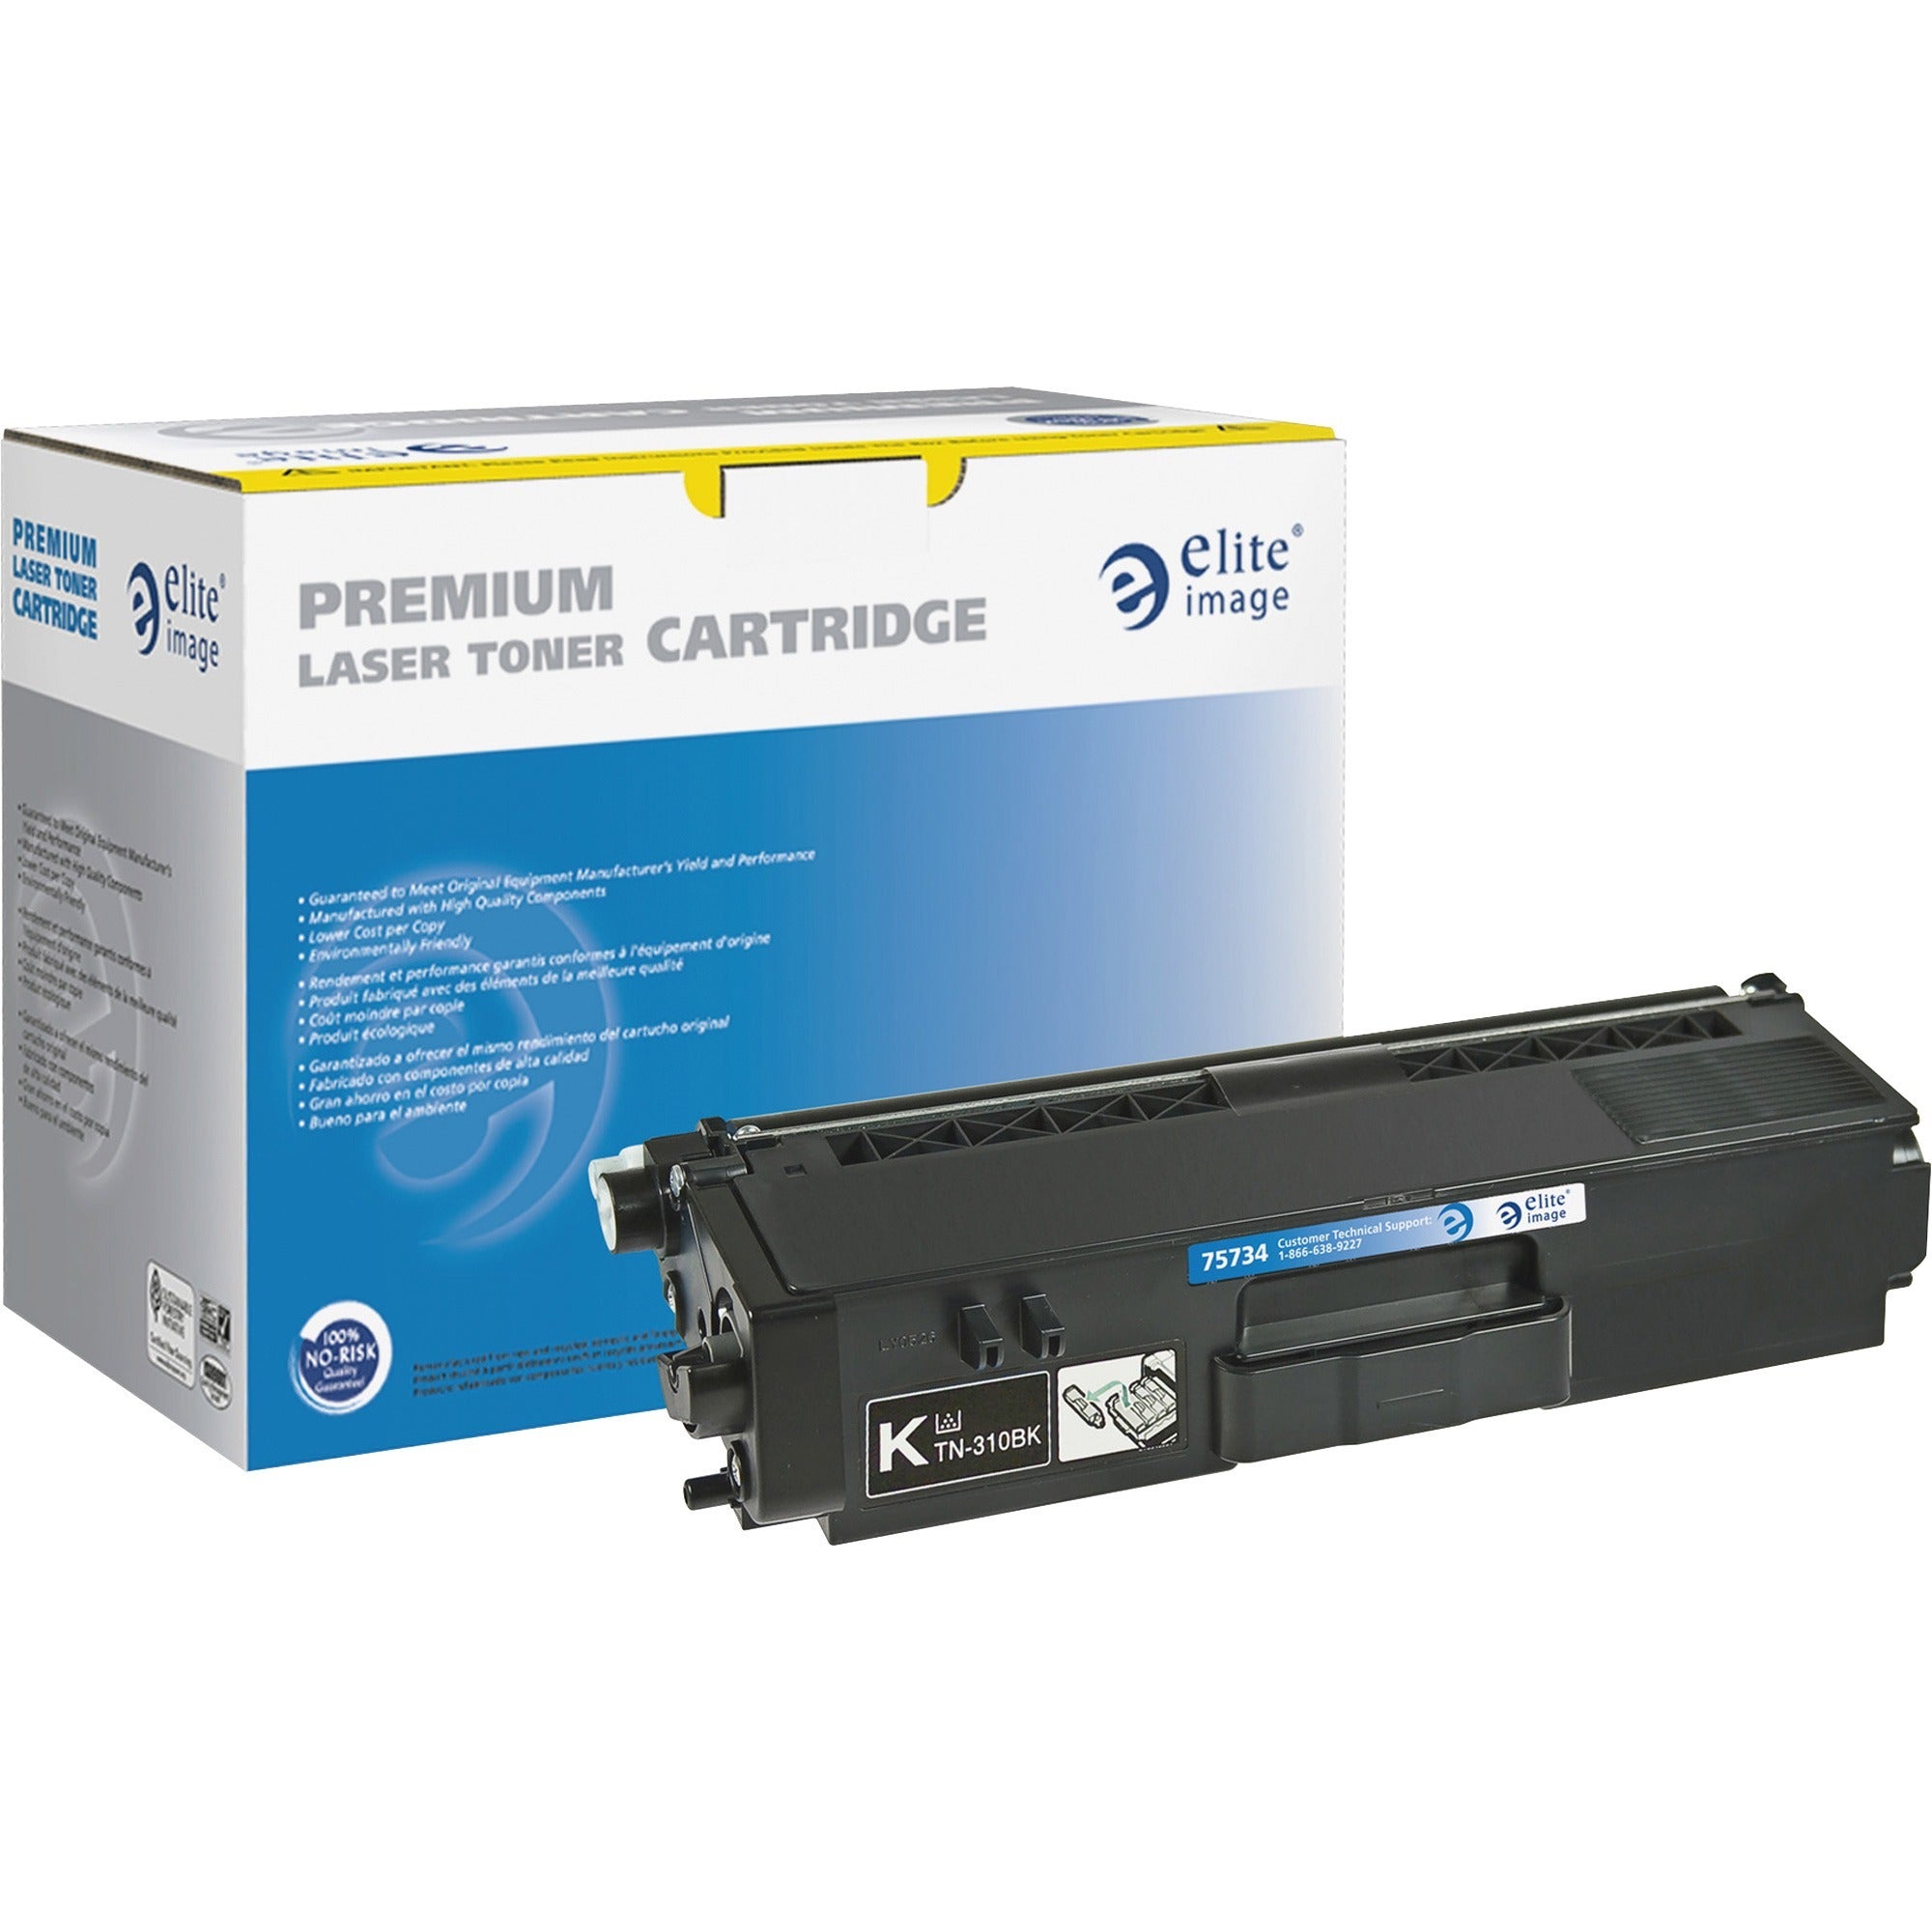 Elite Image Remanufactured High Yield Laser Toner Cartridge - Alternative for Brother TN315 - Black - 1 Each - 6000 Pages